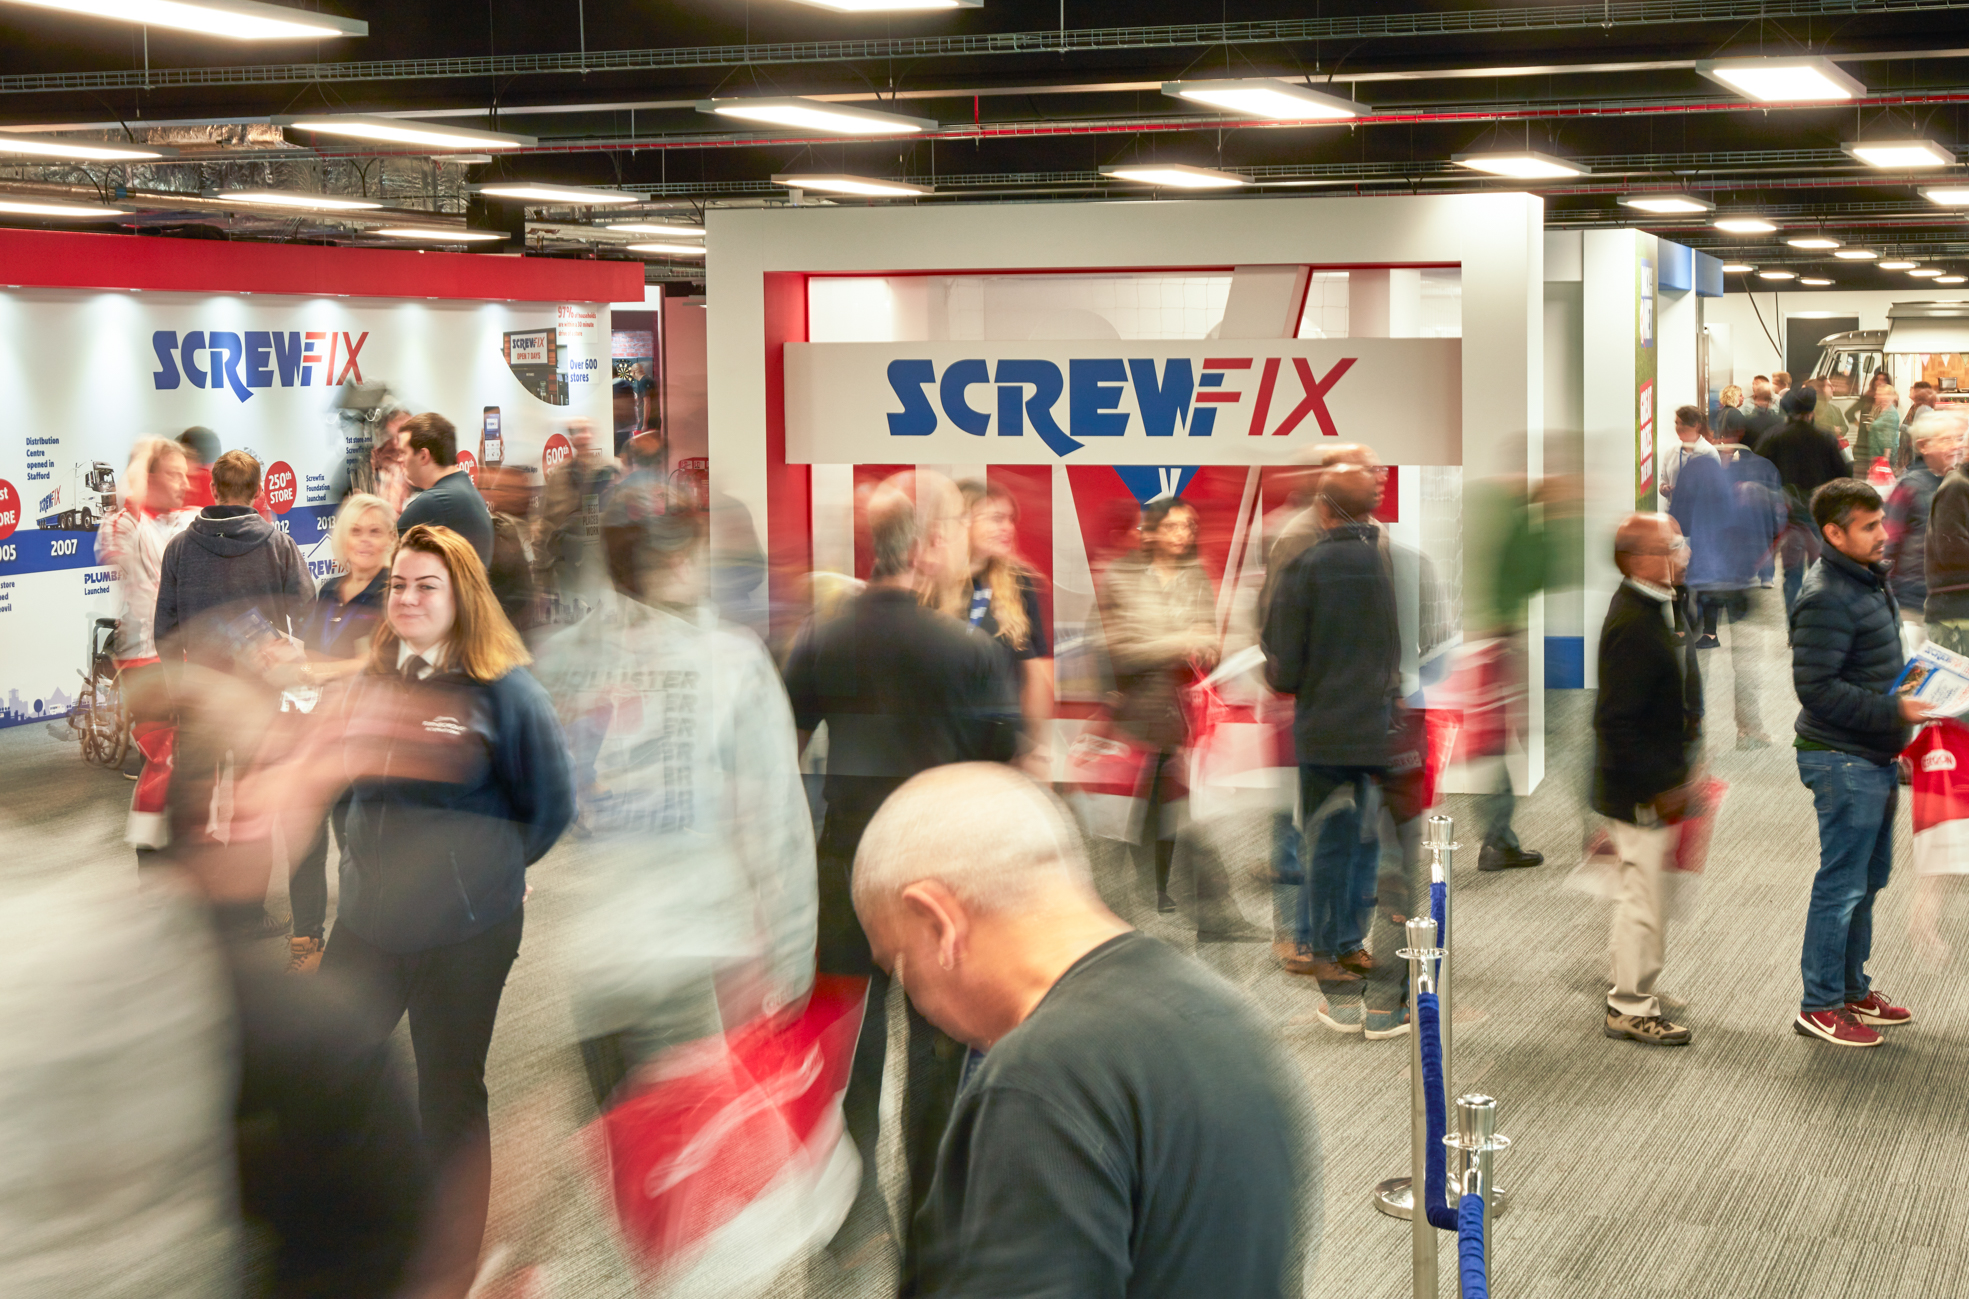 Screwfix LIVE 2019 registrations are now open!